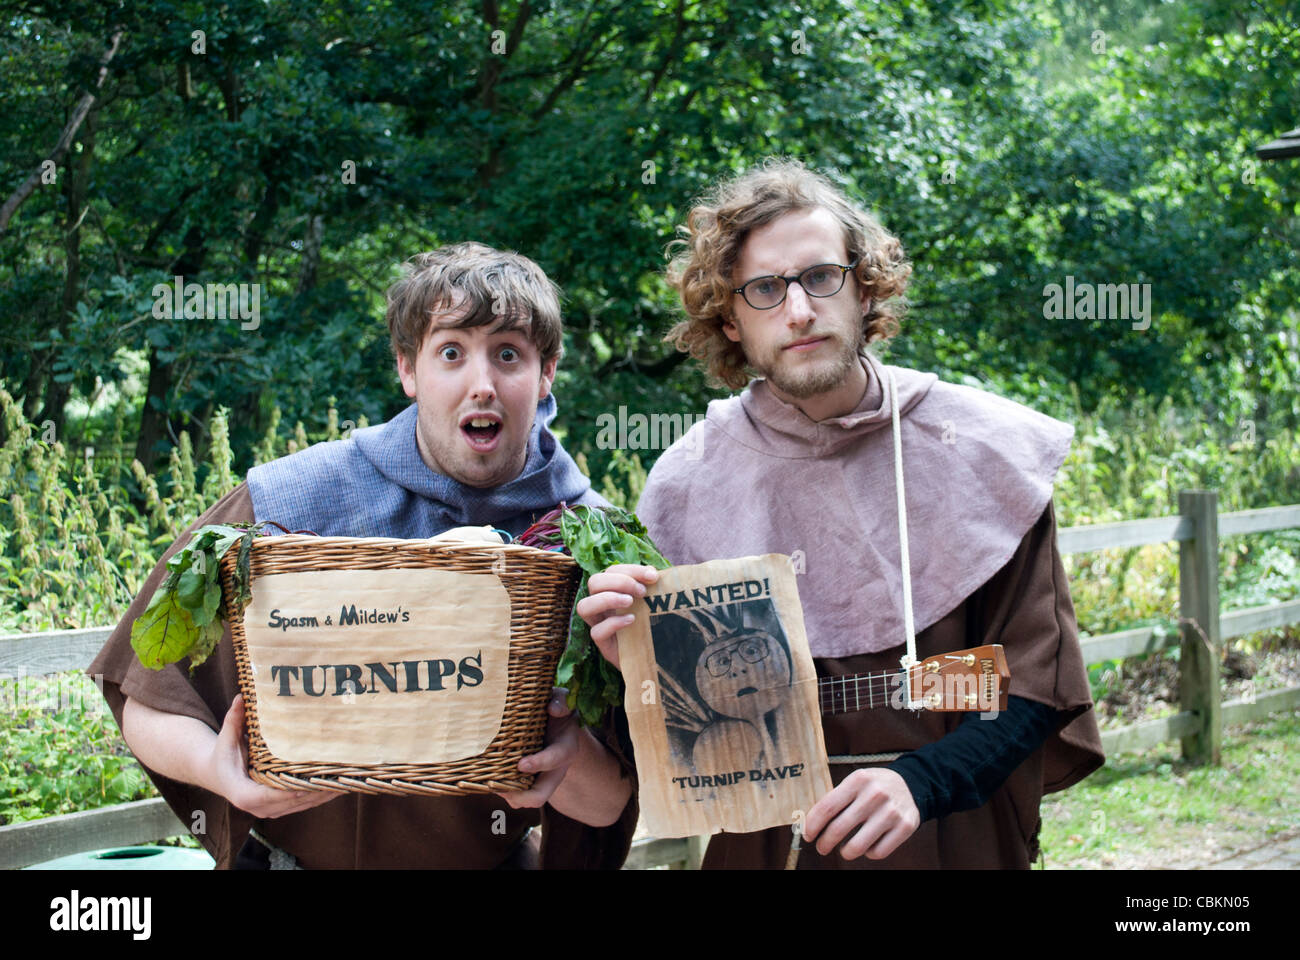 Two medieval peasants holding up a wicker basket with 'Spasm & Mildew's Turnips' sign and a flier with 'Wanted Turnip Dave' Stock Photo